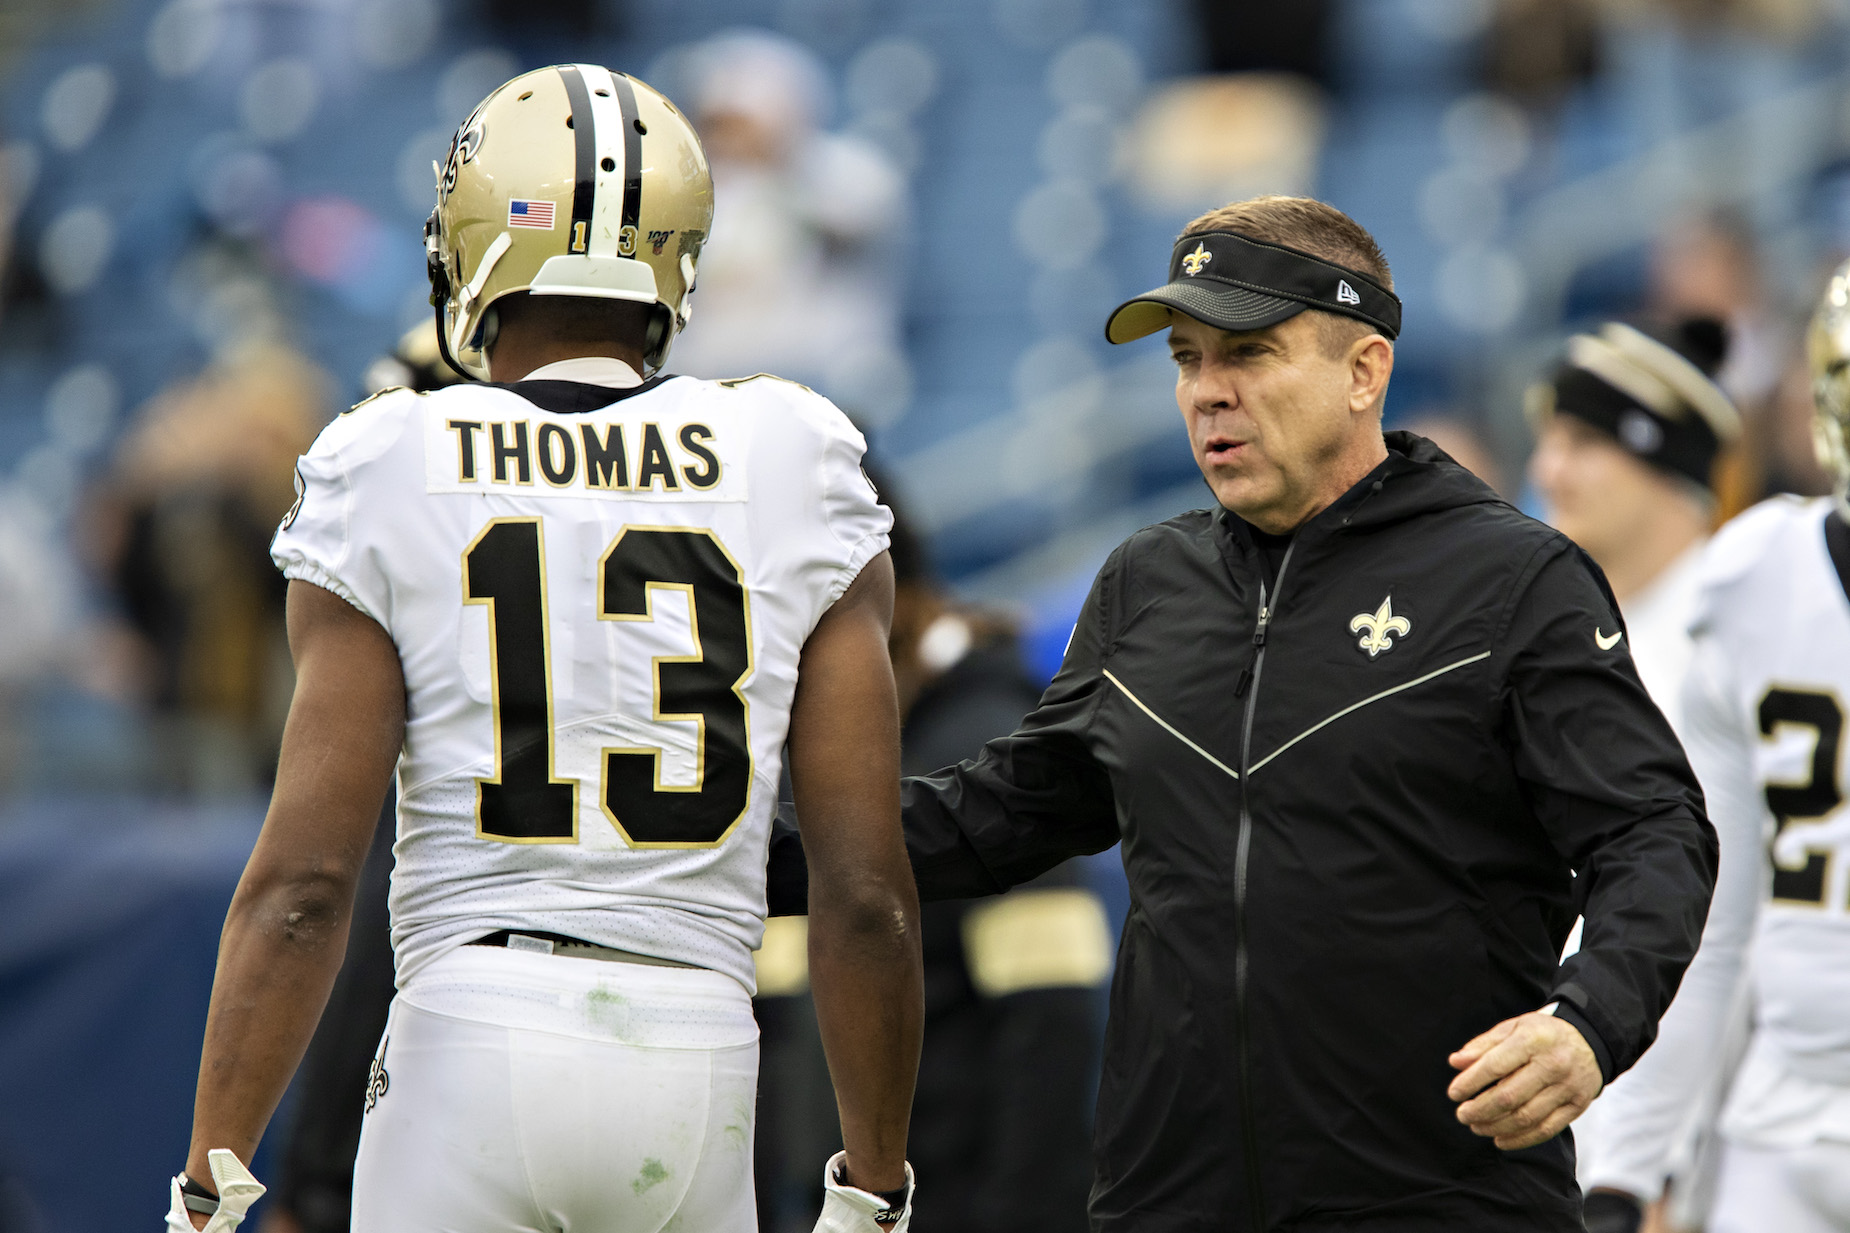 New Orleans Saints head coach Sean Payton took to Twitter and sent a strong message about Michael Thomas' future.